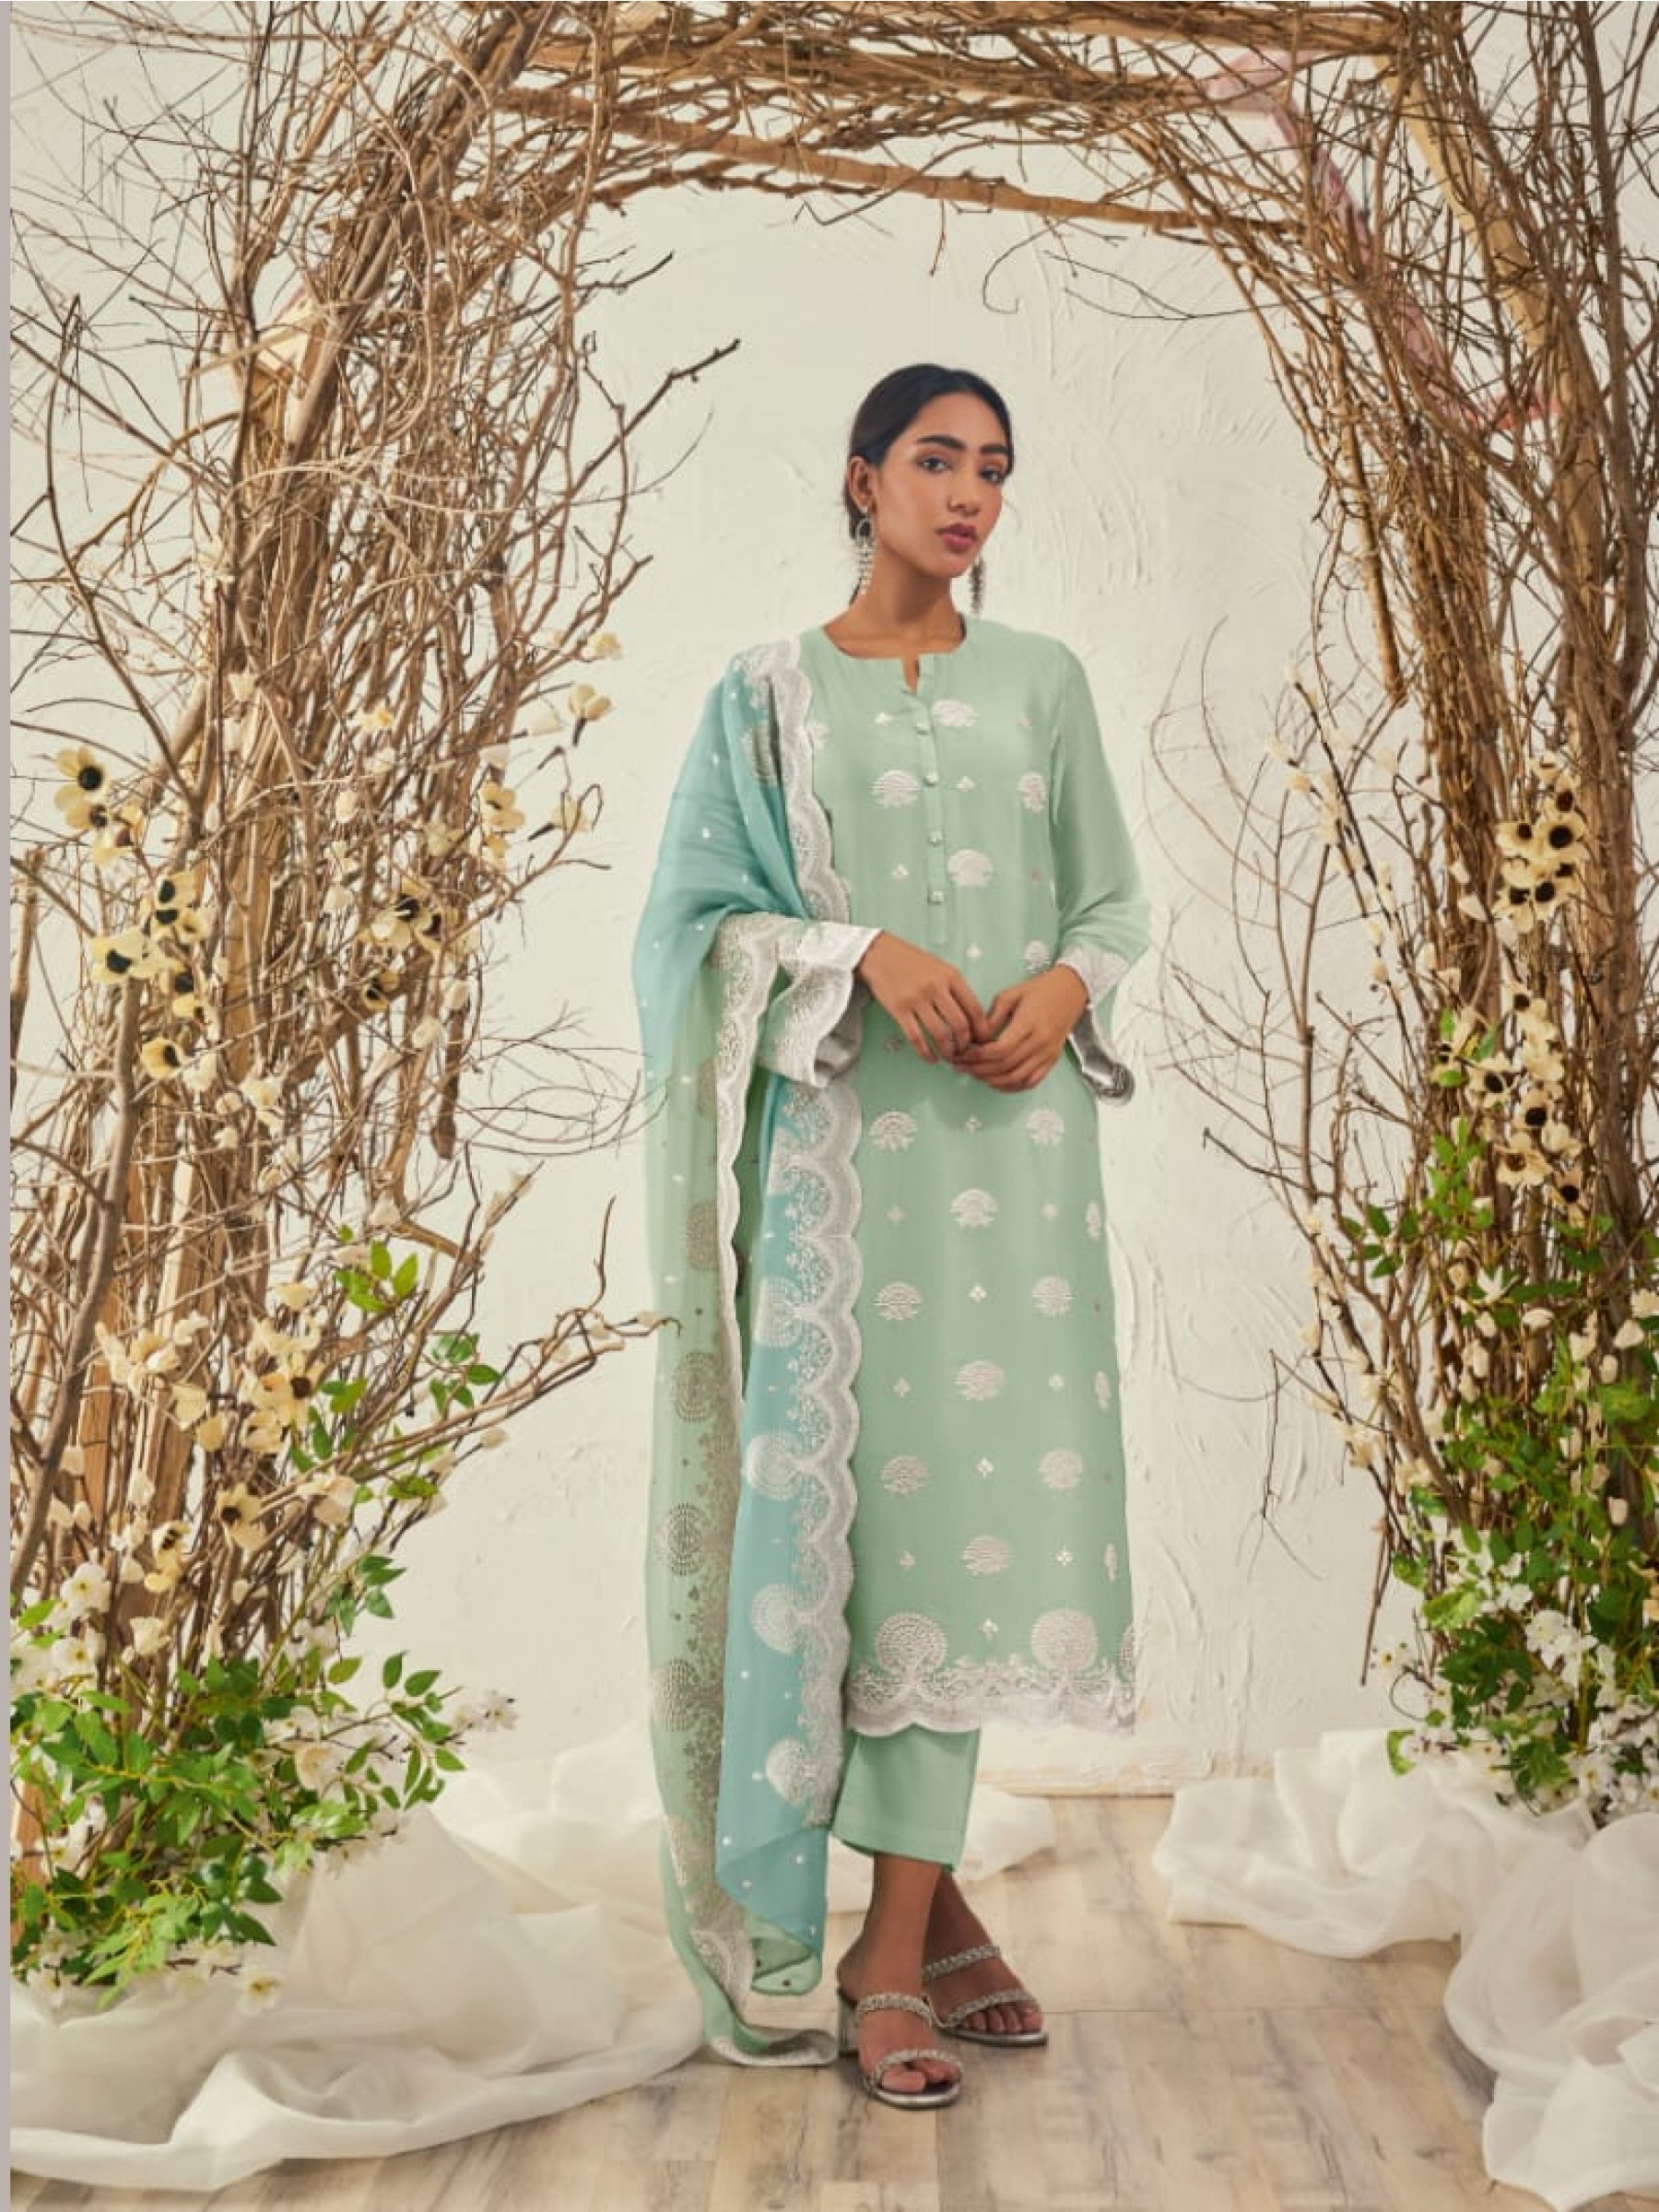 Organza Silk Party Wear  Suit  in Sea Green Color with  Embroidery Work